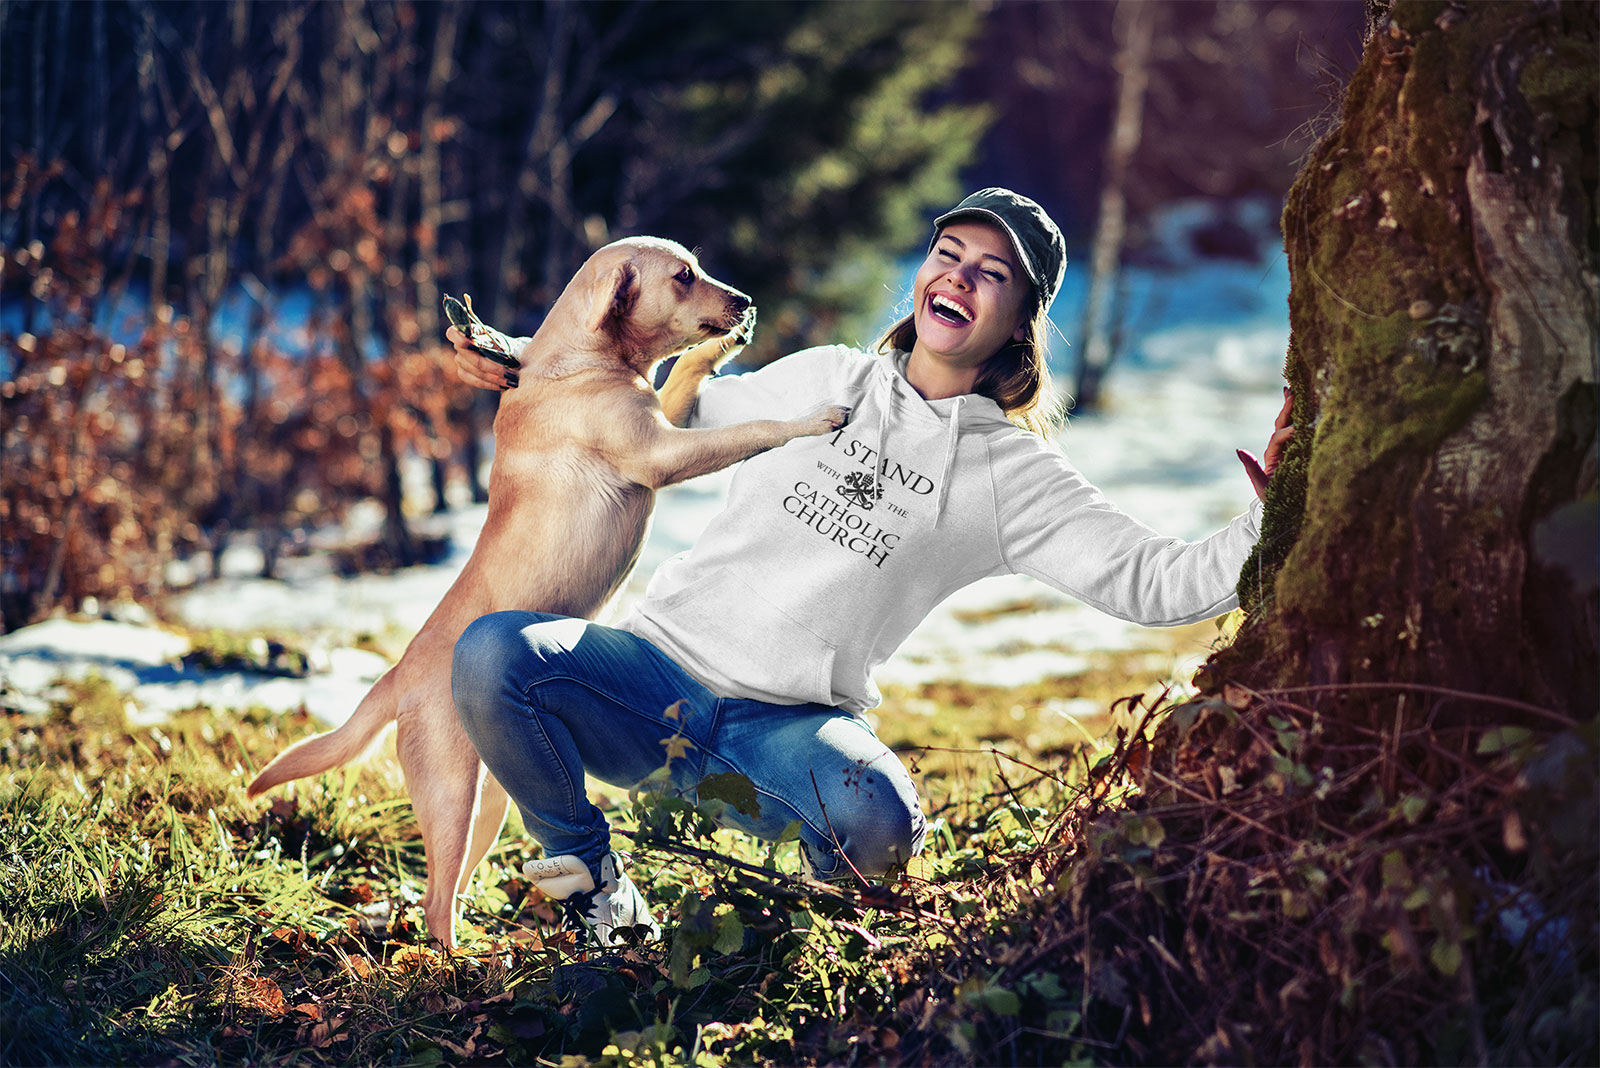 Woman wearing hooded sweatshirt while playing with dog.